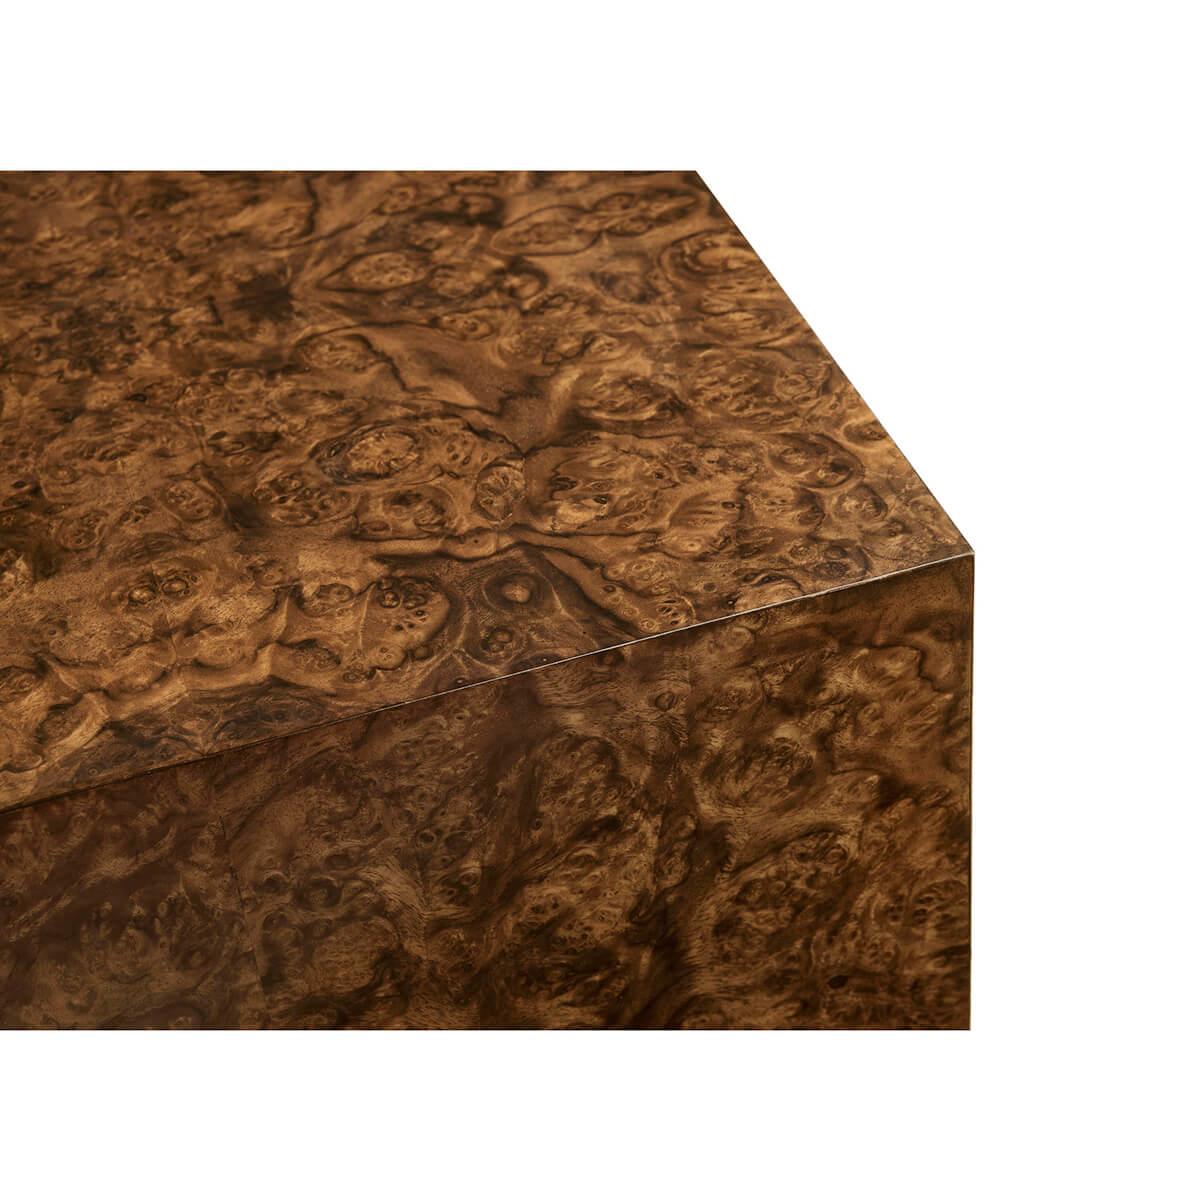 A stunning piece showcasing the timeless beauty of book-matched walnut burl veneer. The square table design is enhanced by a unique rounded radius end in one corner, lending a modern yet refined aesthetic to the piece. This distinctive feature not